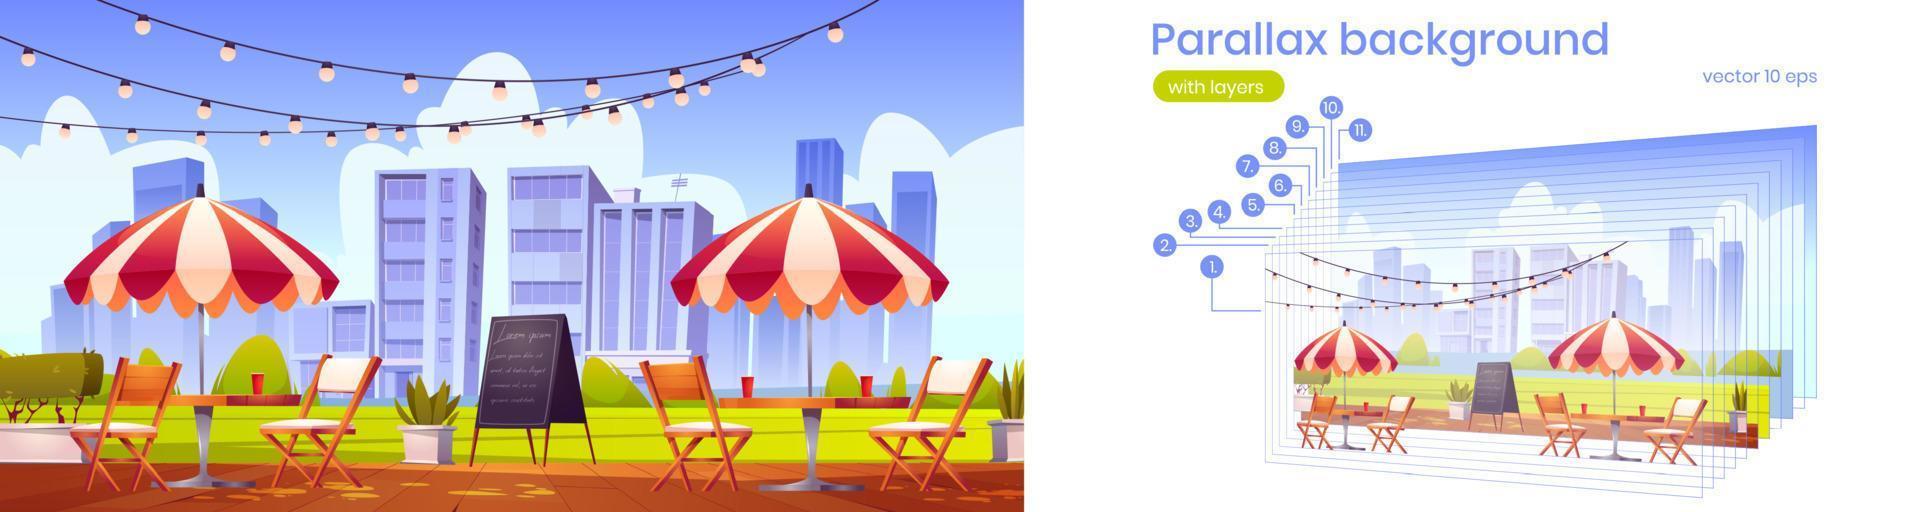 Parallax background summer cafe at outdoor terrace vector